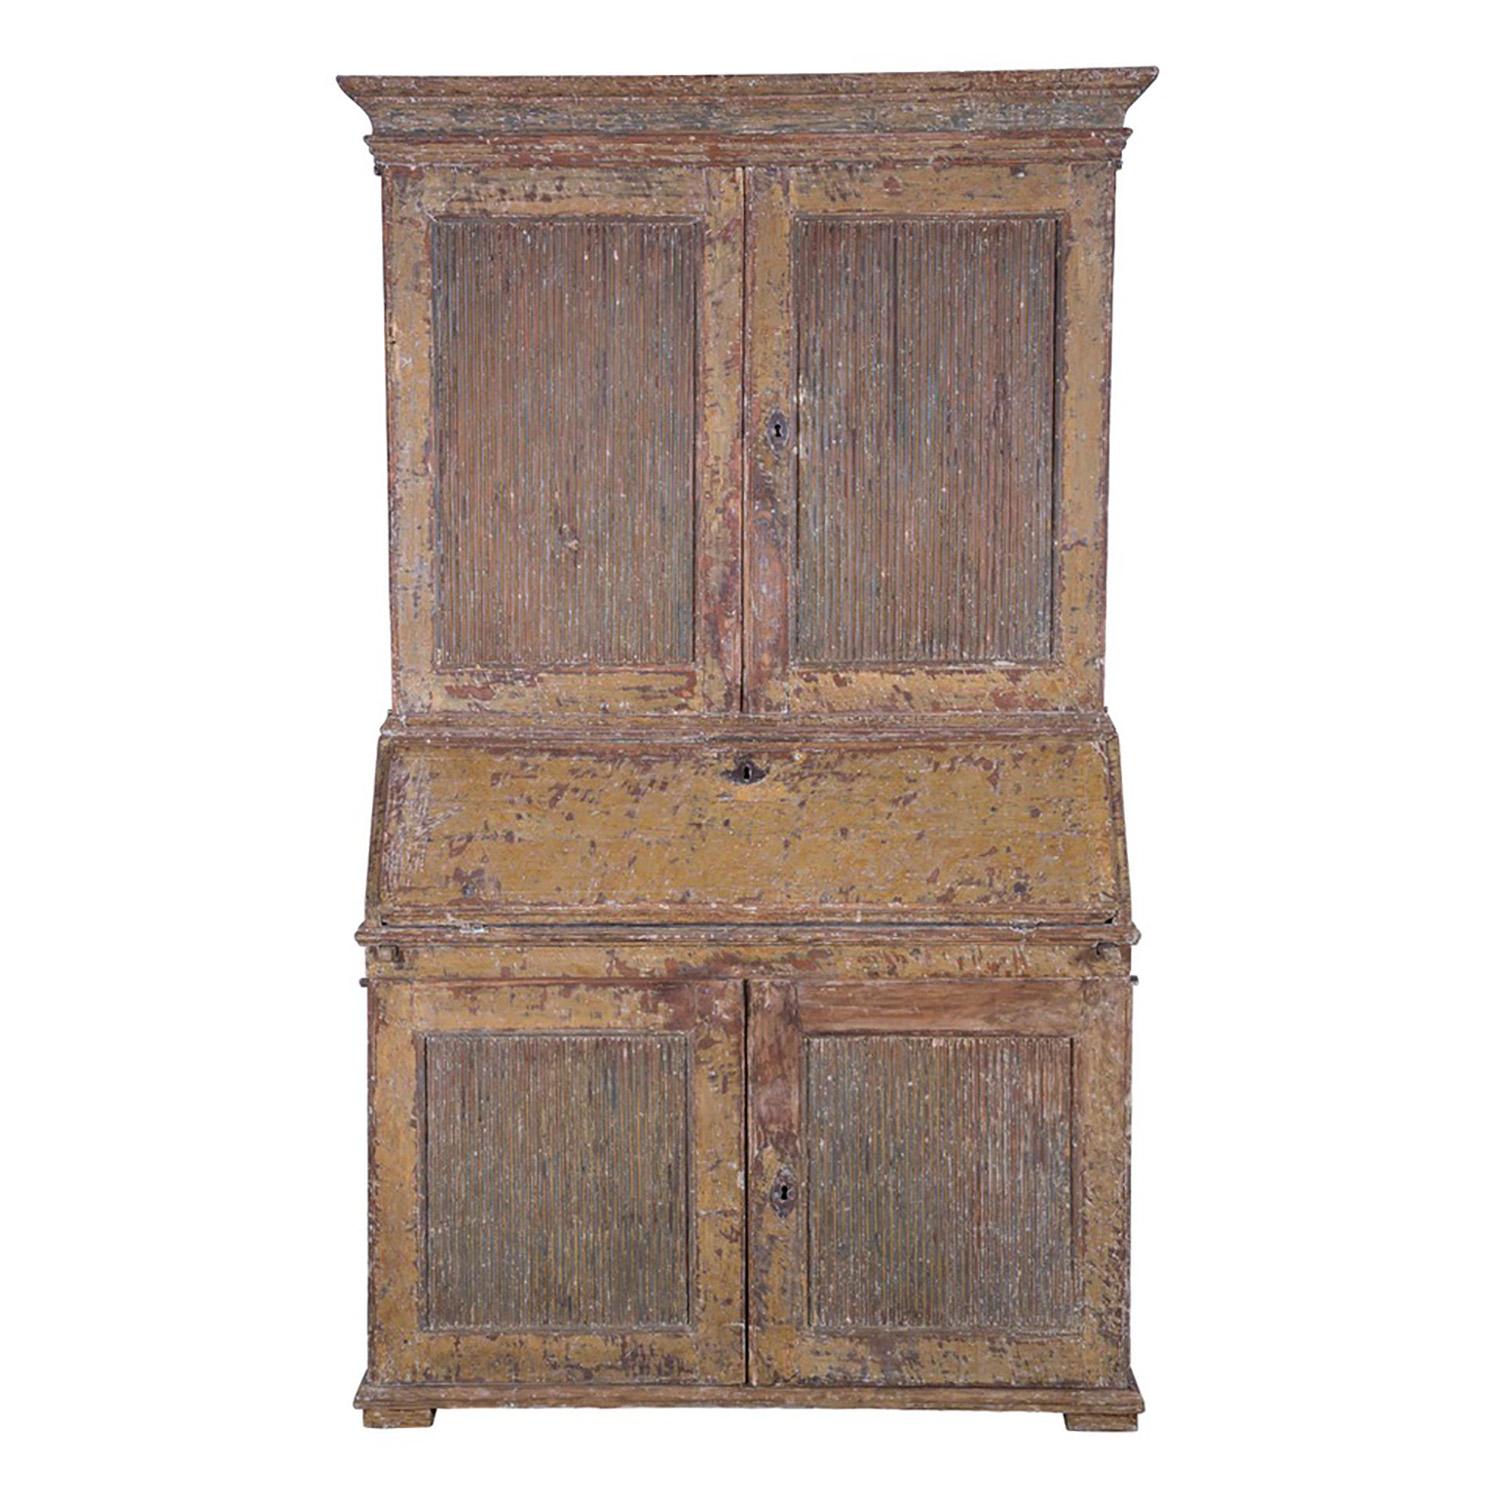 Late 18th Century Gustavian Secretaire with Reeded Doors